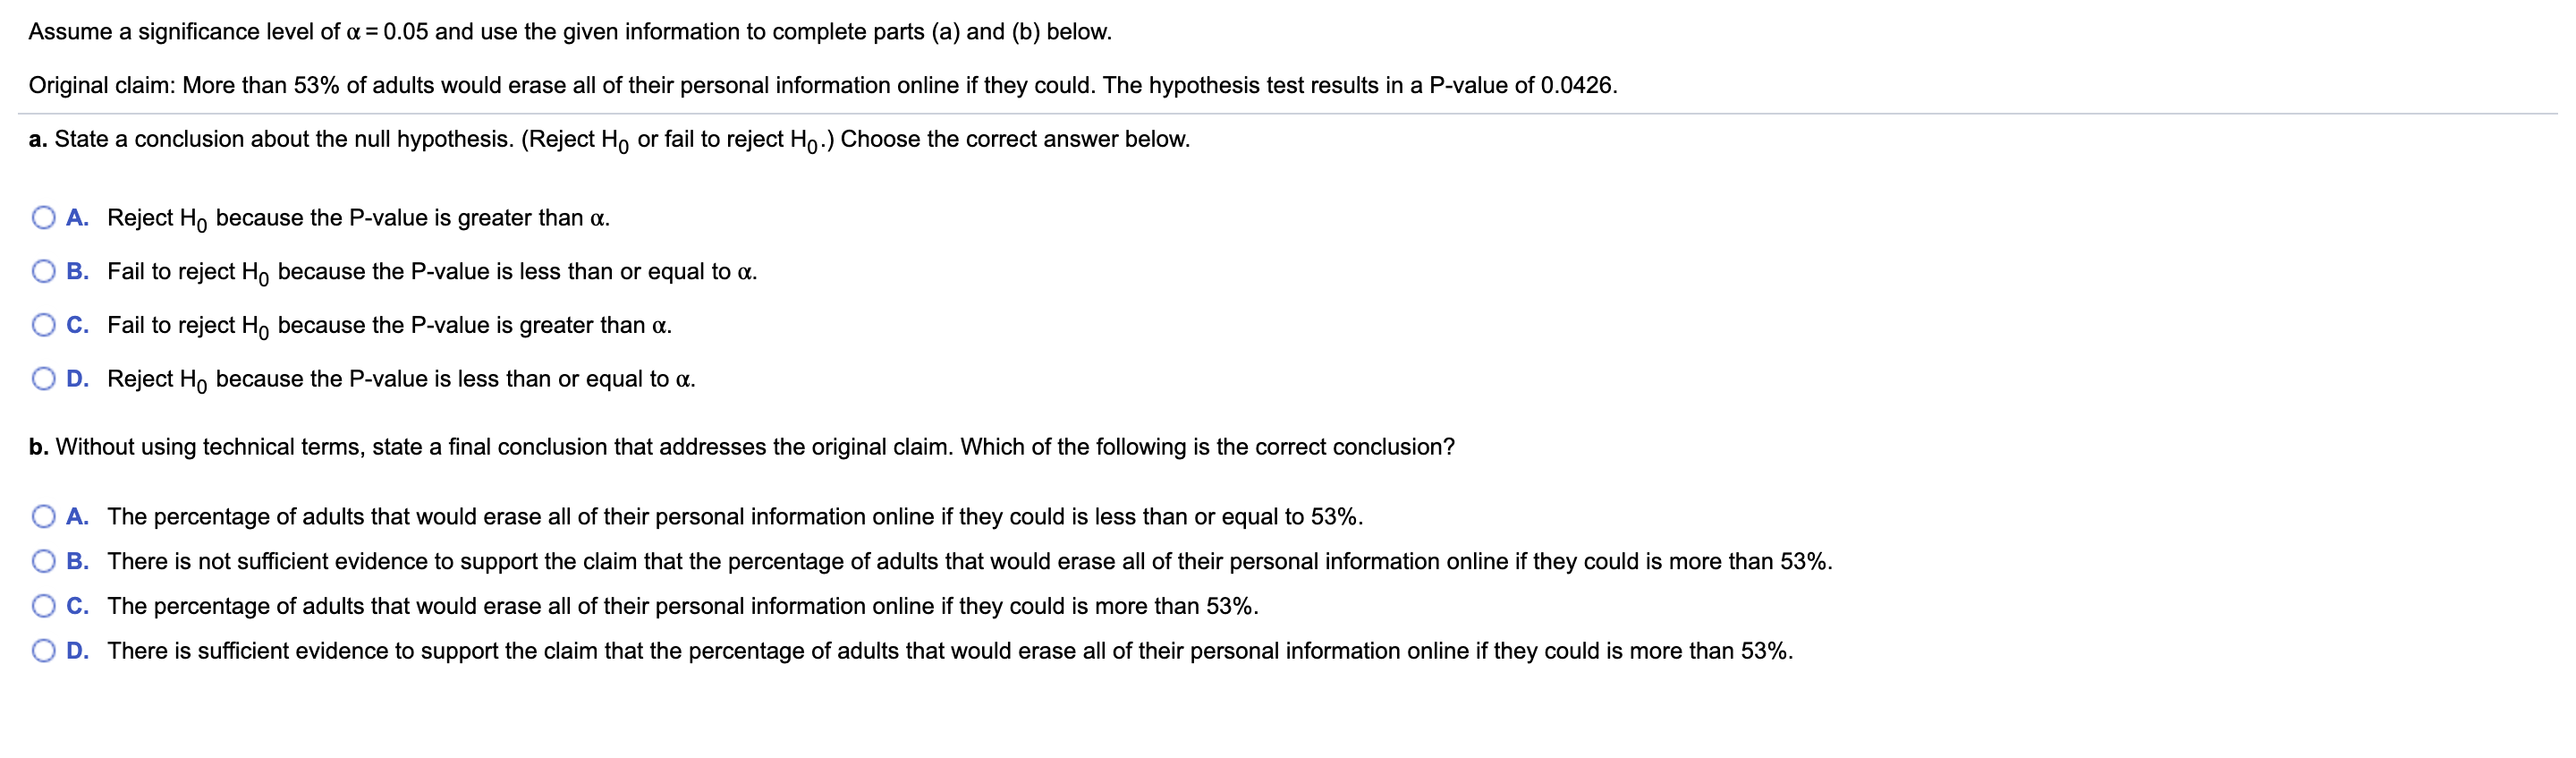 Assume a significance level of a = 0.05 and use the given information to complete parts (a) and (b) below.
Original claim: More than 53% of adults would erase all of their personal information online if they could. The hypothesis test results in a P-value of 0.0426.
a. State a conclusion about the null hypothesis. (Reject H, or fail to reject Ho.) Choose the correct answer below.
A. Reject Ho because the P-value is greater than a.
B. Fail to reject Ho because the P-value is less than or equal to a.
C. Fail to reject H, because the P-value is greater than a.
D. Reject Ho because the P-value is less than or equal to a.
b. Without using technical terms, state a final conclusion that addresses the original claim. Which of the following is the correct conclusion?
A. The percentage of adults that would erase all of their personal information online if they could is less than or equal to 53%.
B. There is not sufficient evidence to support the claim that the percentage of adults that would erase all of their personal information online if they could is more than 53%.
C. The percentage of adults that would erase all of their personal information online if they could is more than 53%.
D. There is sufficient evidence to support the claim that the percentage of adults that would erase all of their personal information online if they could is more than 53%.
